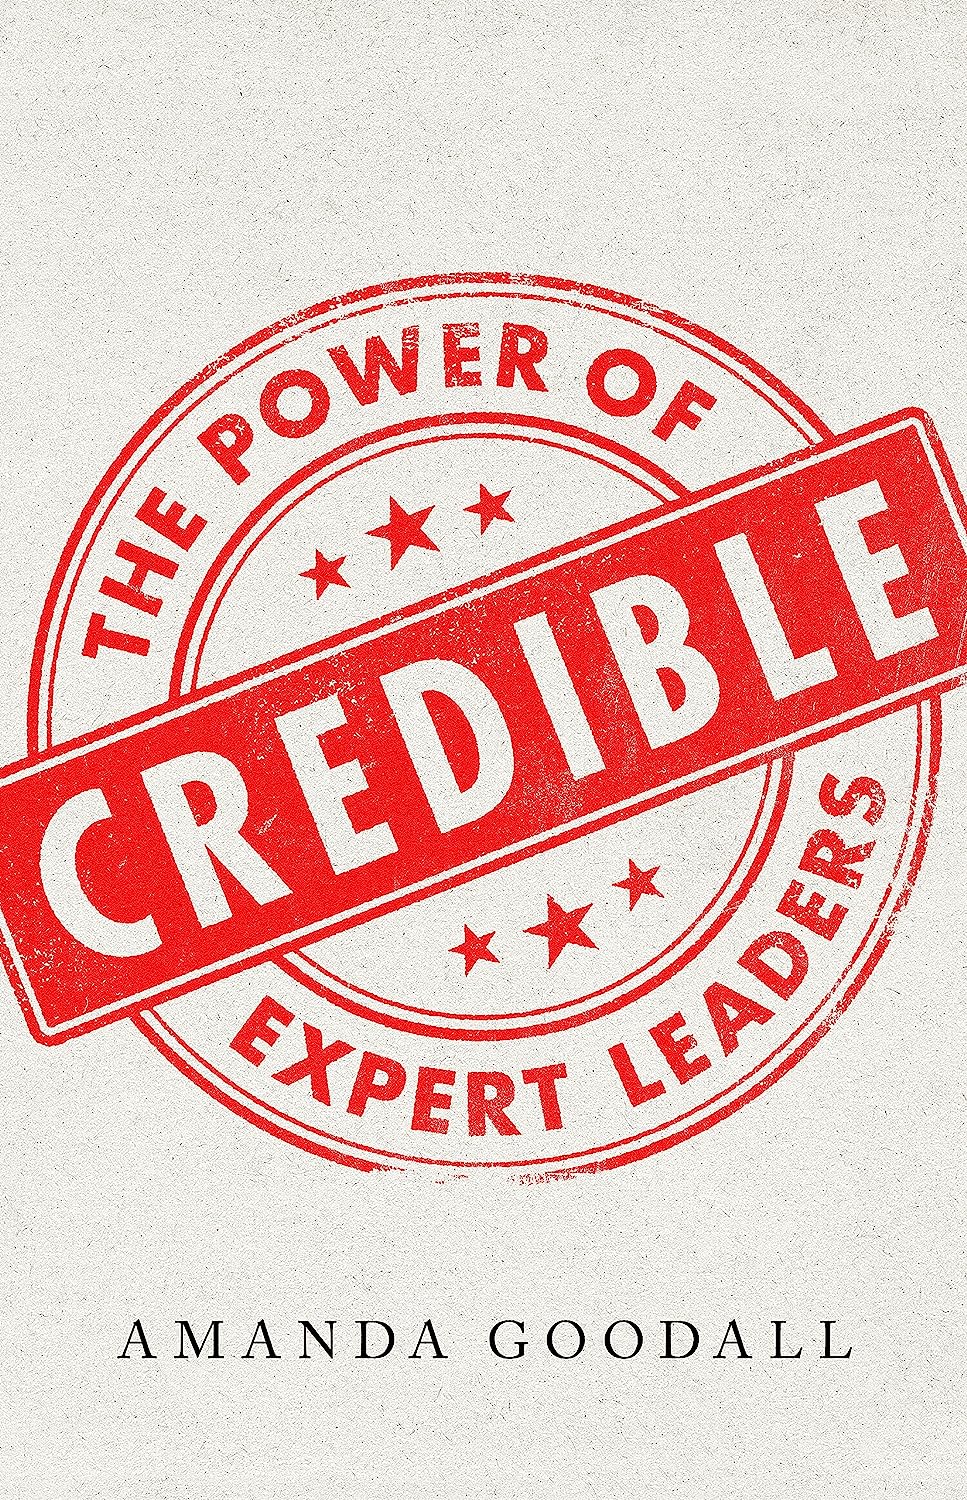 The　Leaders　BookPal　Credible:　of　Power　Expert